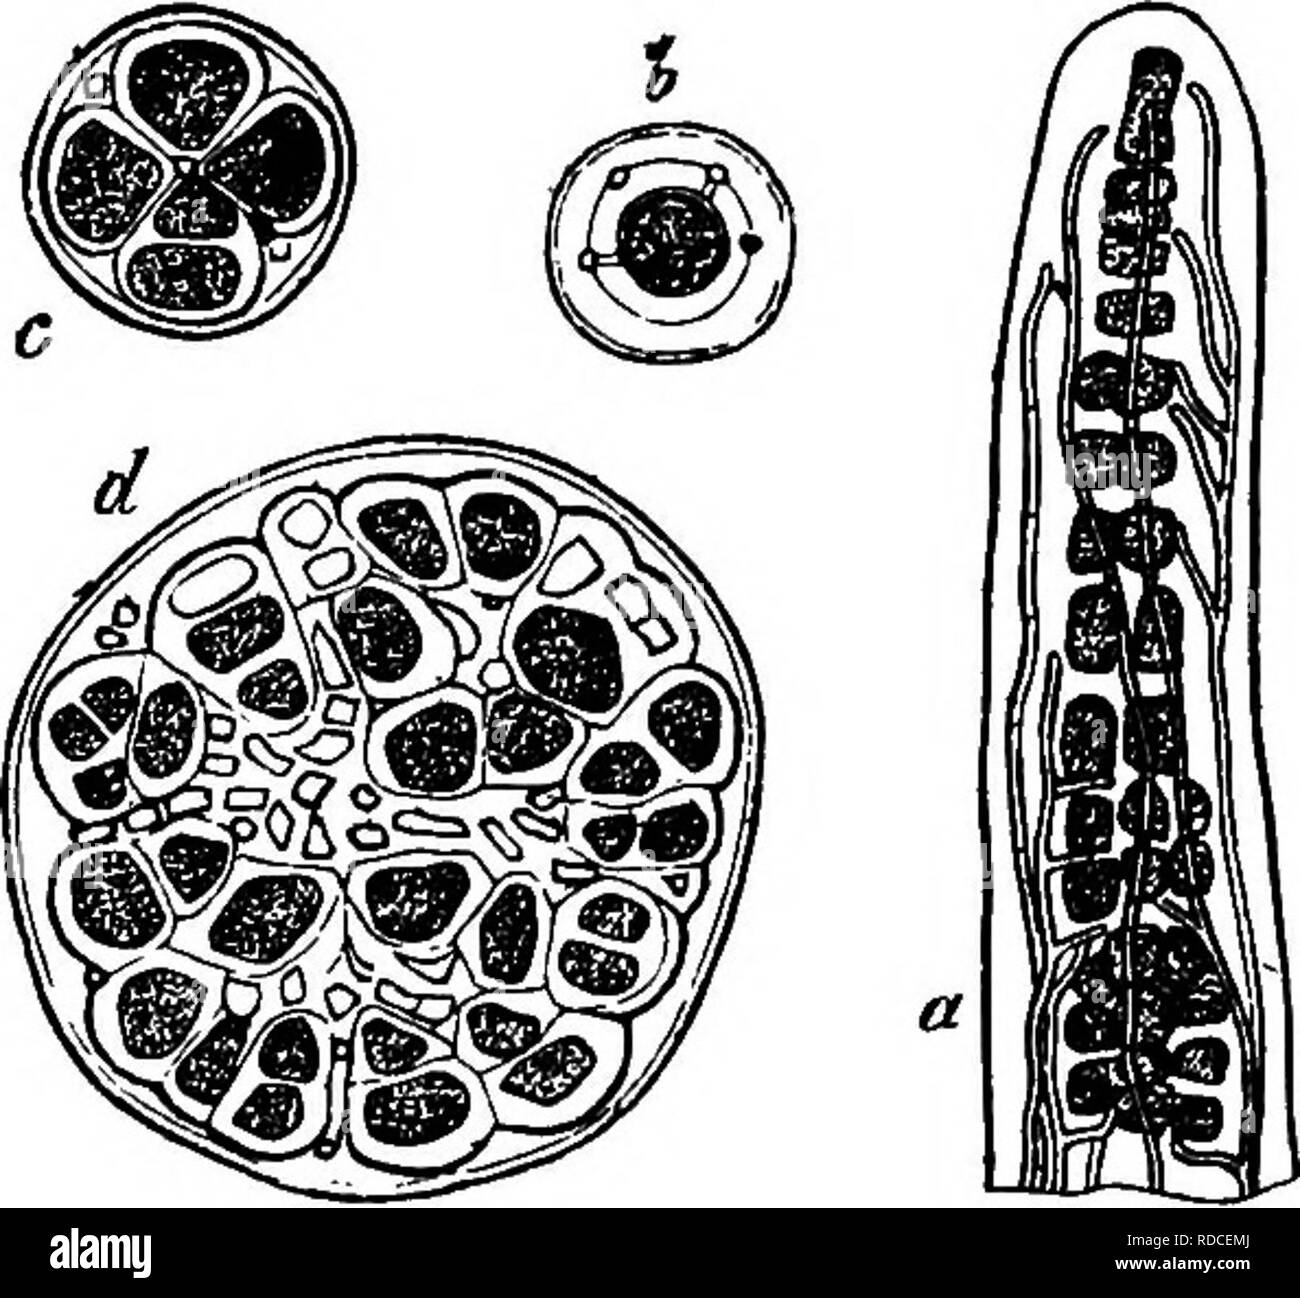 . Comparative morphology and biology of the fungi, mycetozoa and bacteria . Plant morphology; Fungi; Myxomycetes; Bacteriology. Fig. 177. Ephibe pubescetis, Fr. A branched Blifonu thallus of Stigonema with the hyphae of the Fungus ^towing thrbugh its gelatinous membranes. Extremity of a branch of the thallus with a young lateral branch a; h hyphae, g cells of the Alga, gs the apex of the thallus After Sachs. Magn. 500 times. Fig. 178. Eptube pubtsUHS, Fr. A branched filiform thallus of Siigonema with hyphae of the Fungus growing through its gelatinous membranes, a tip of the thallus after bein Stock Photo